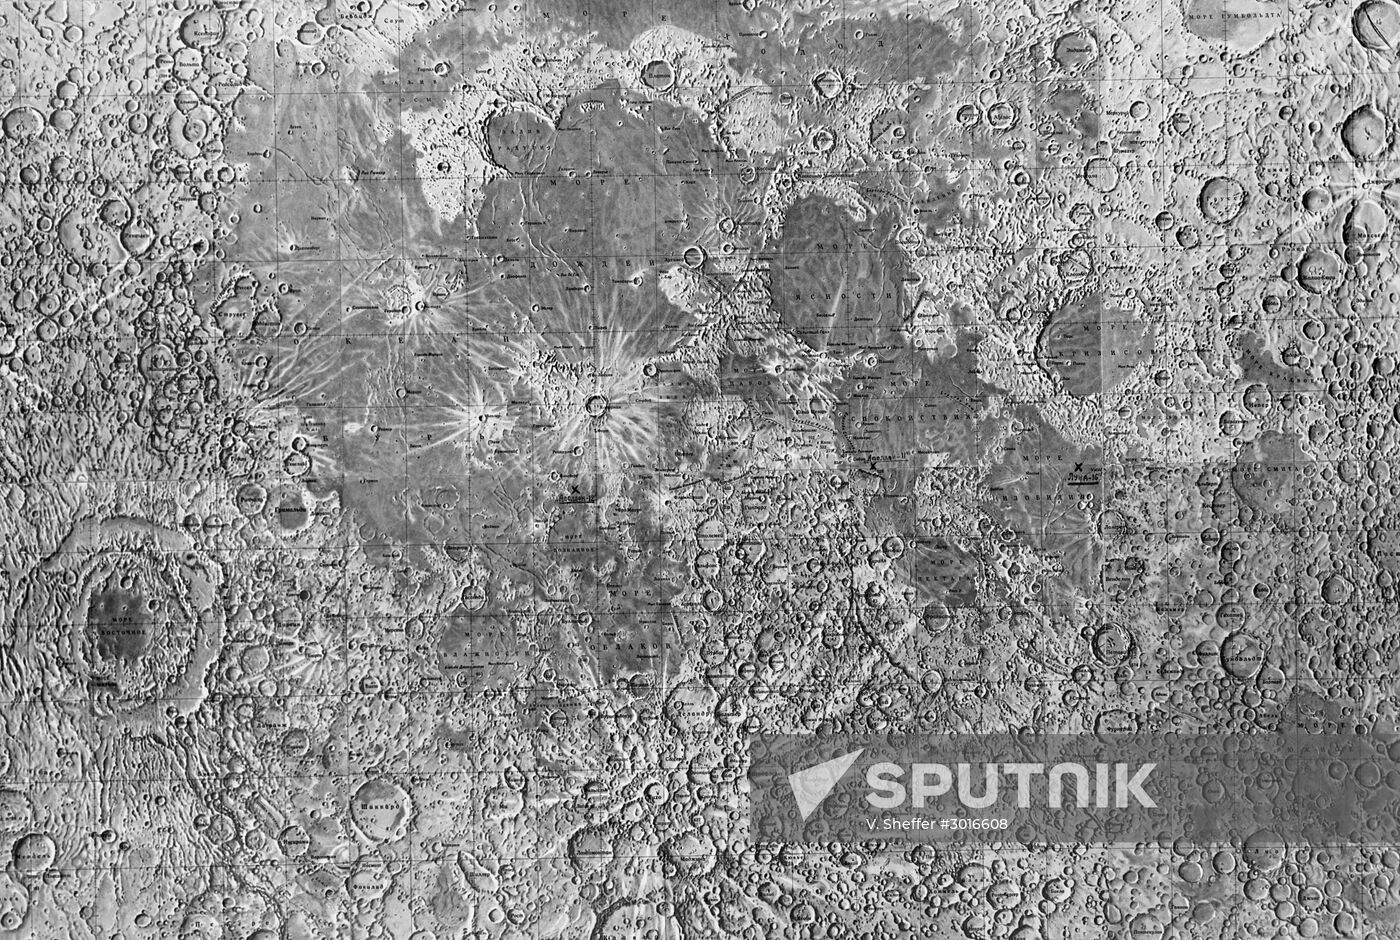 Moon map with Luna 16 landing site marked